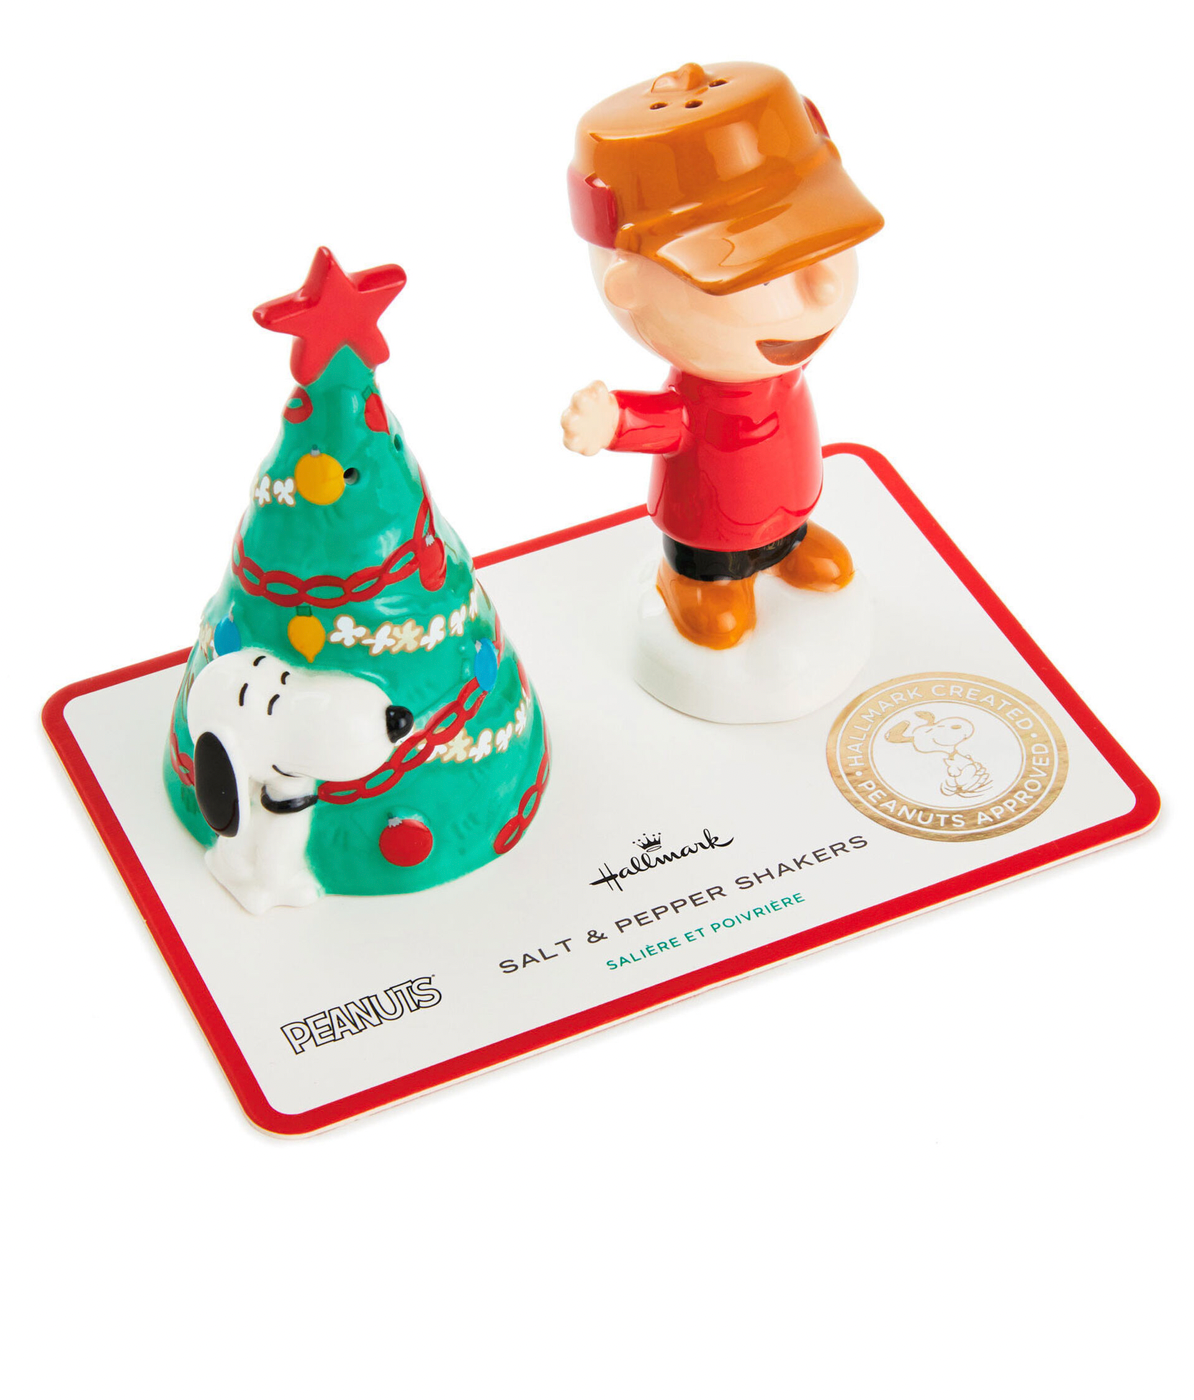 Hallmark Peanuts Charlie Brown Snoopy With Tree Salt and Pepper Shakers New